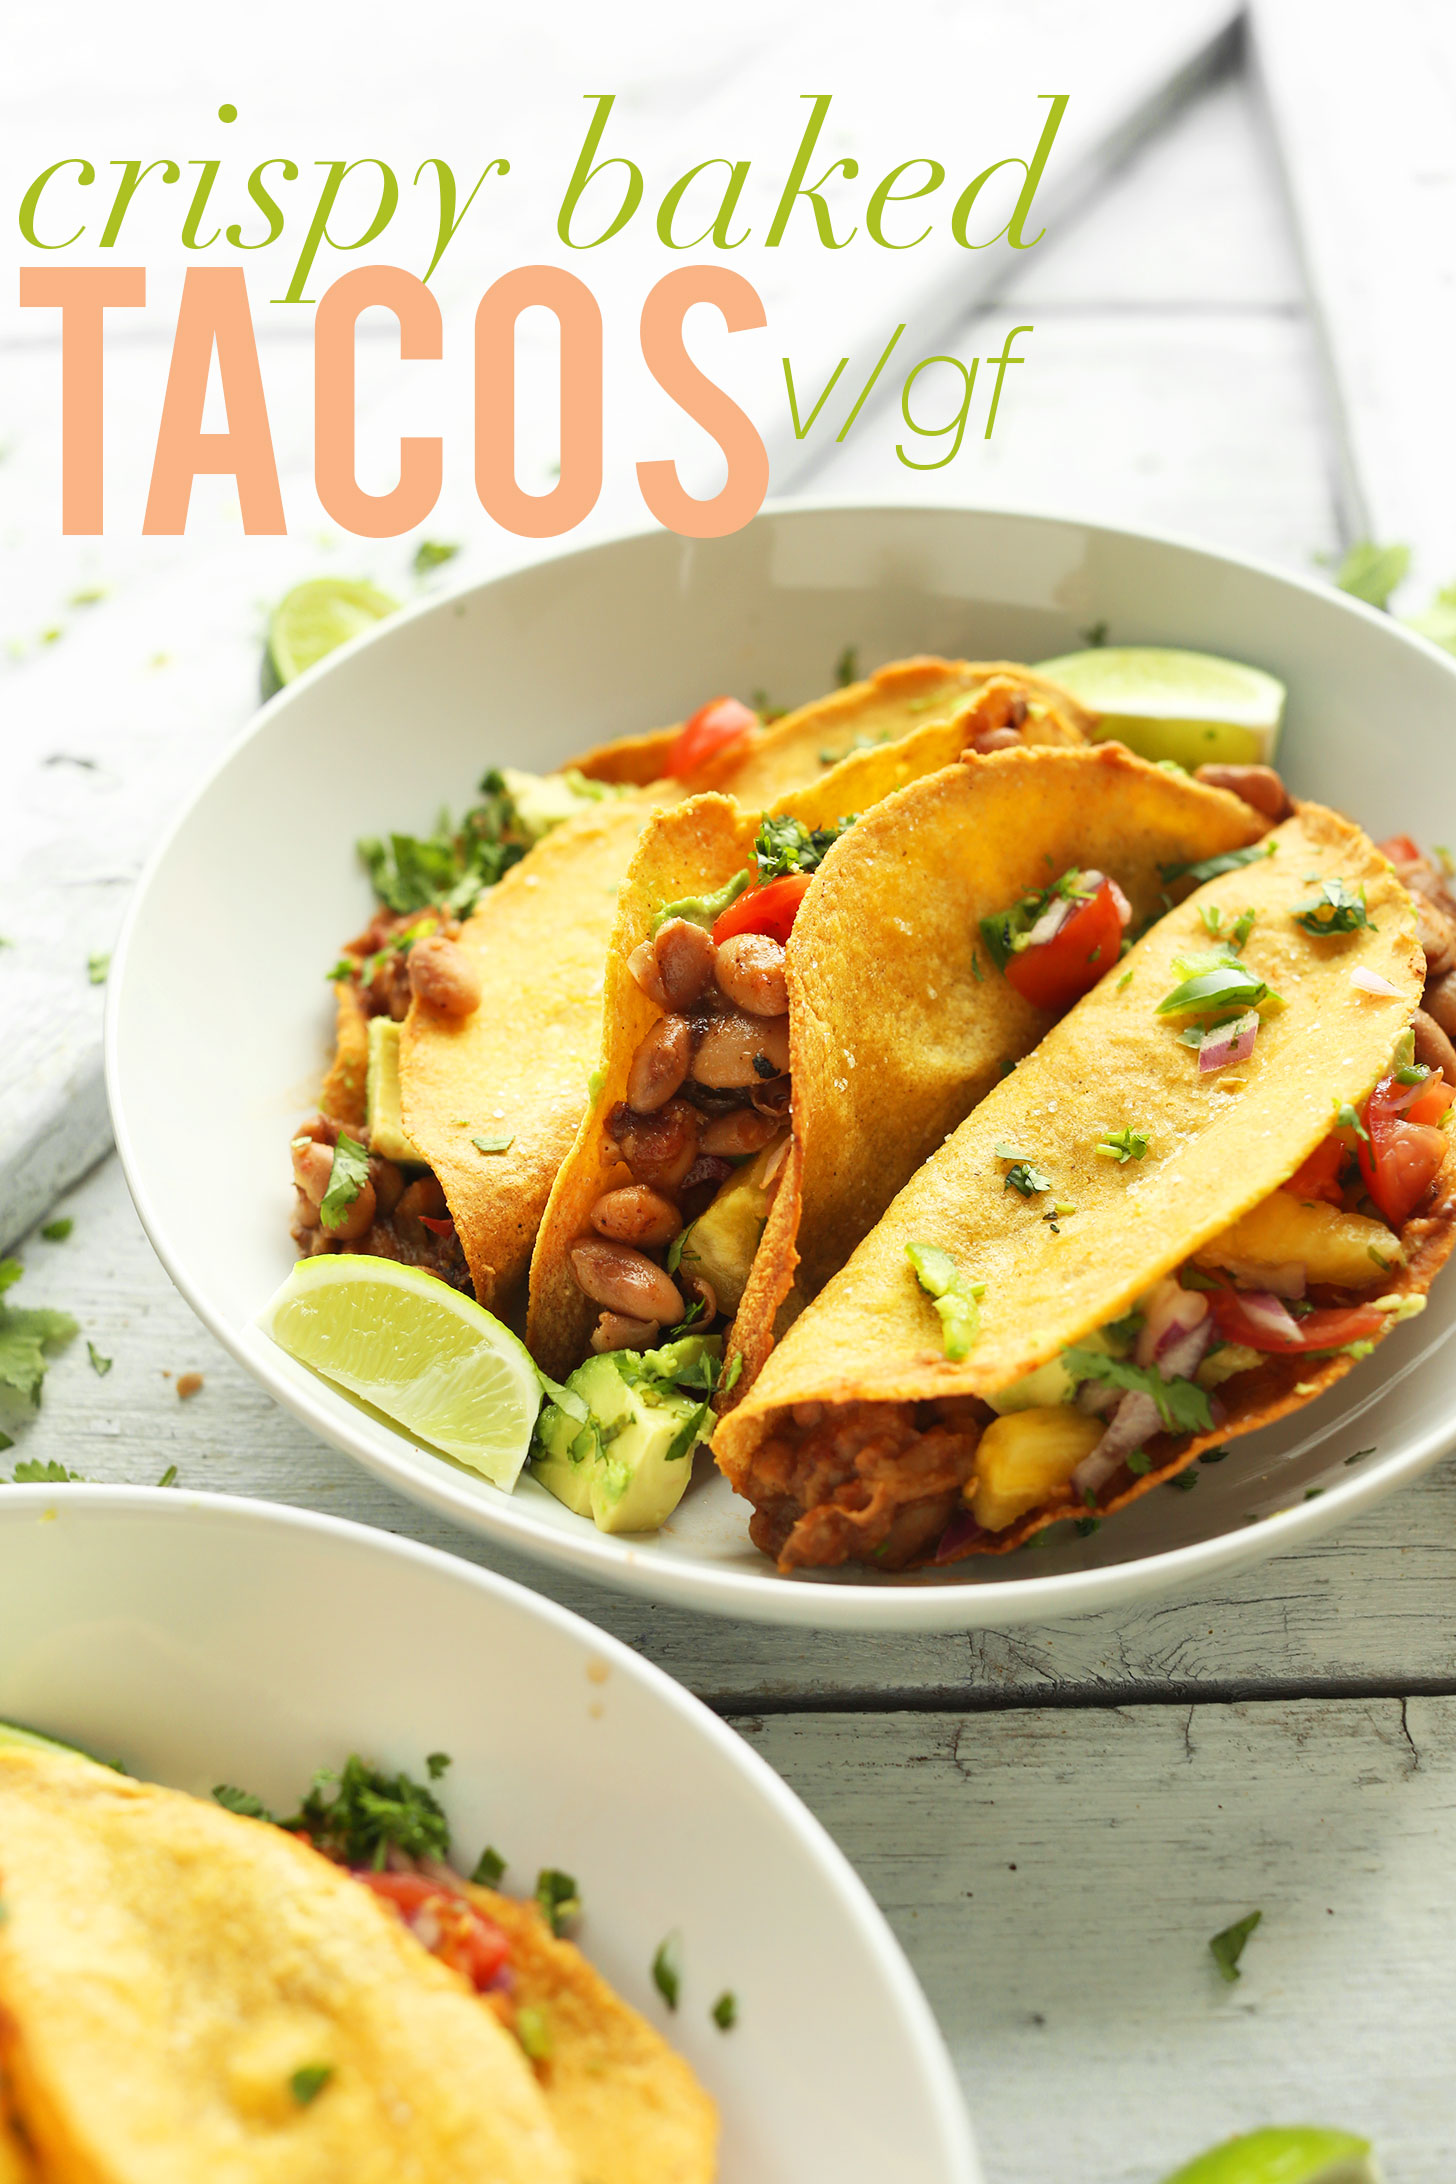 Bowls filled with our recipe for gluten-free vegan Baked Tacos with Pineapple Salsa